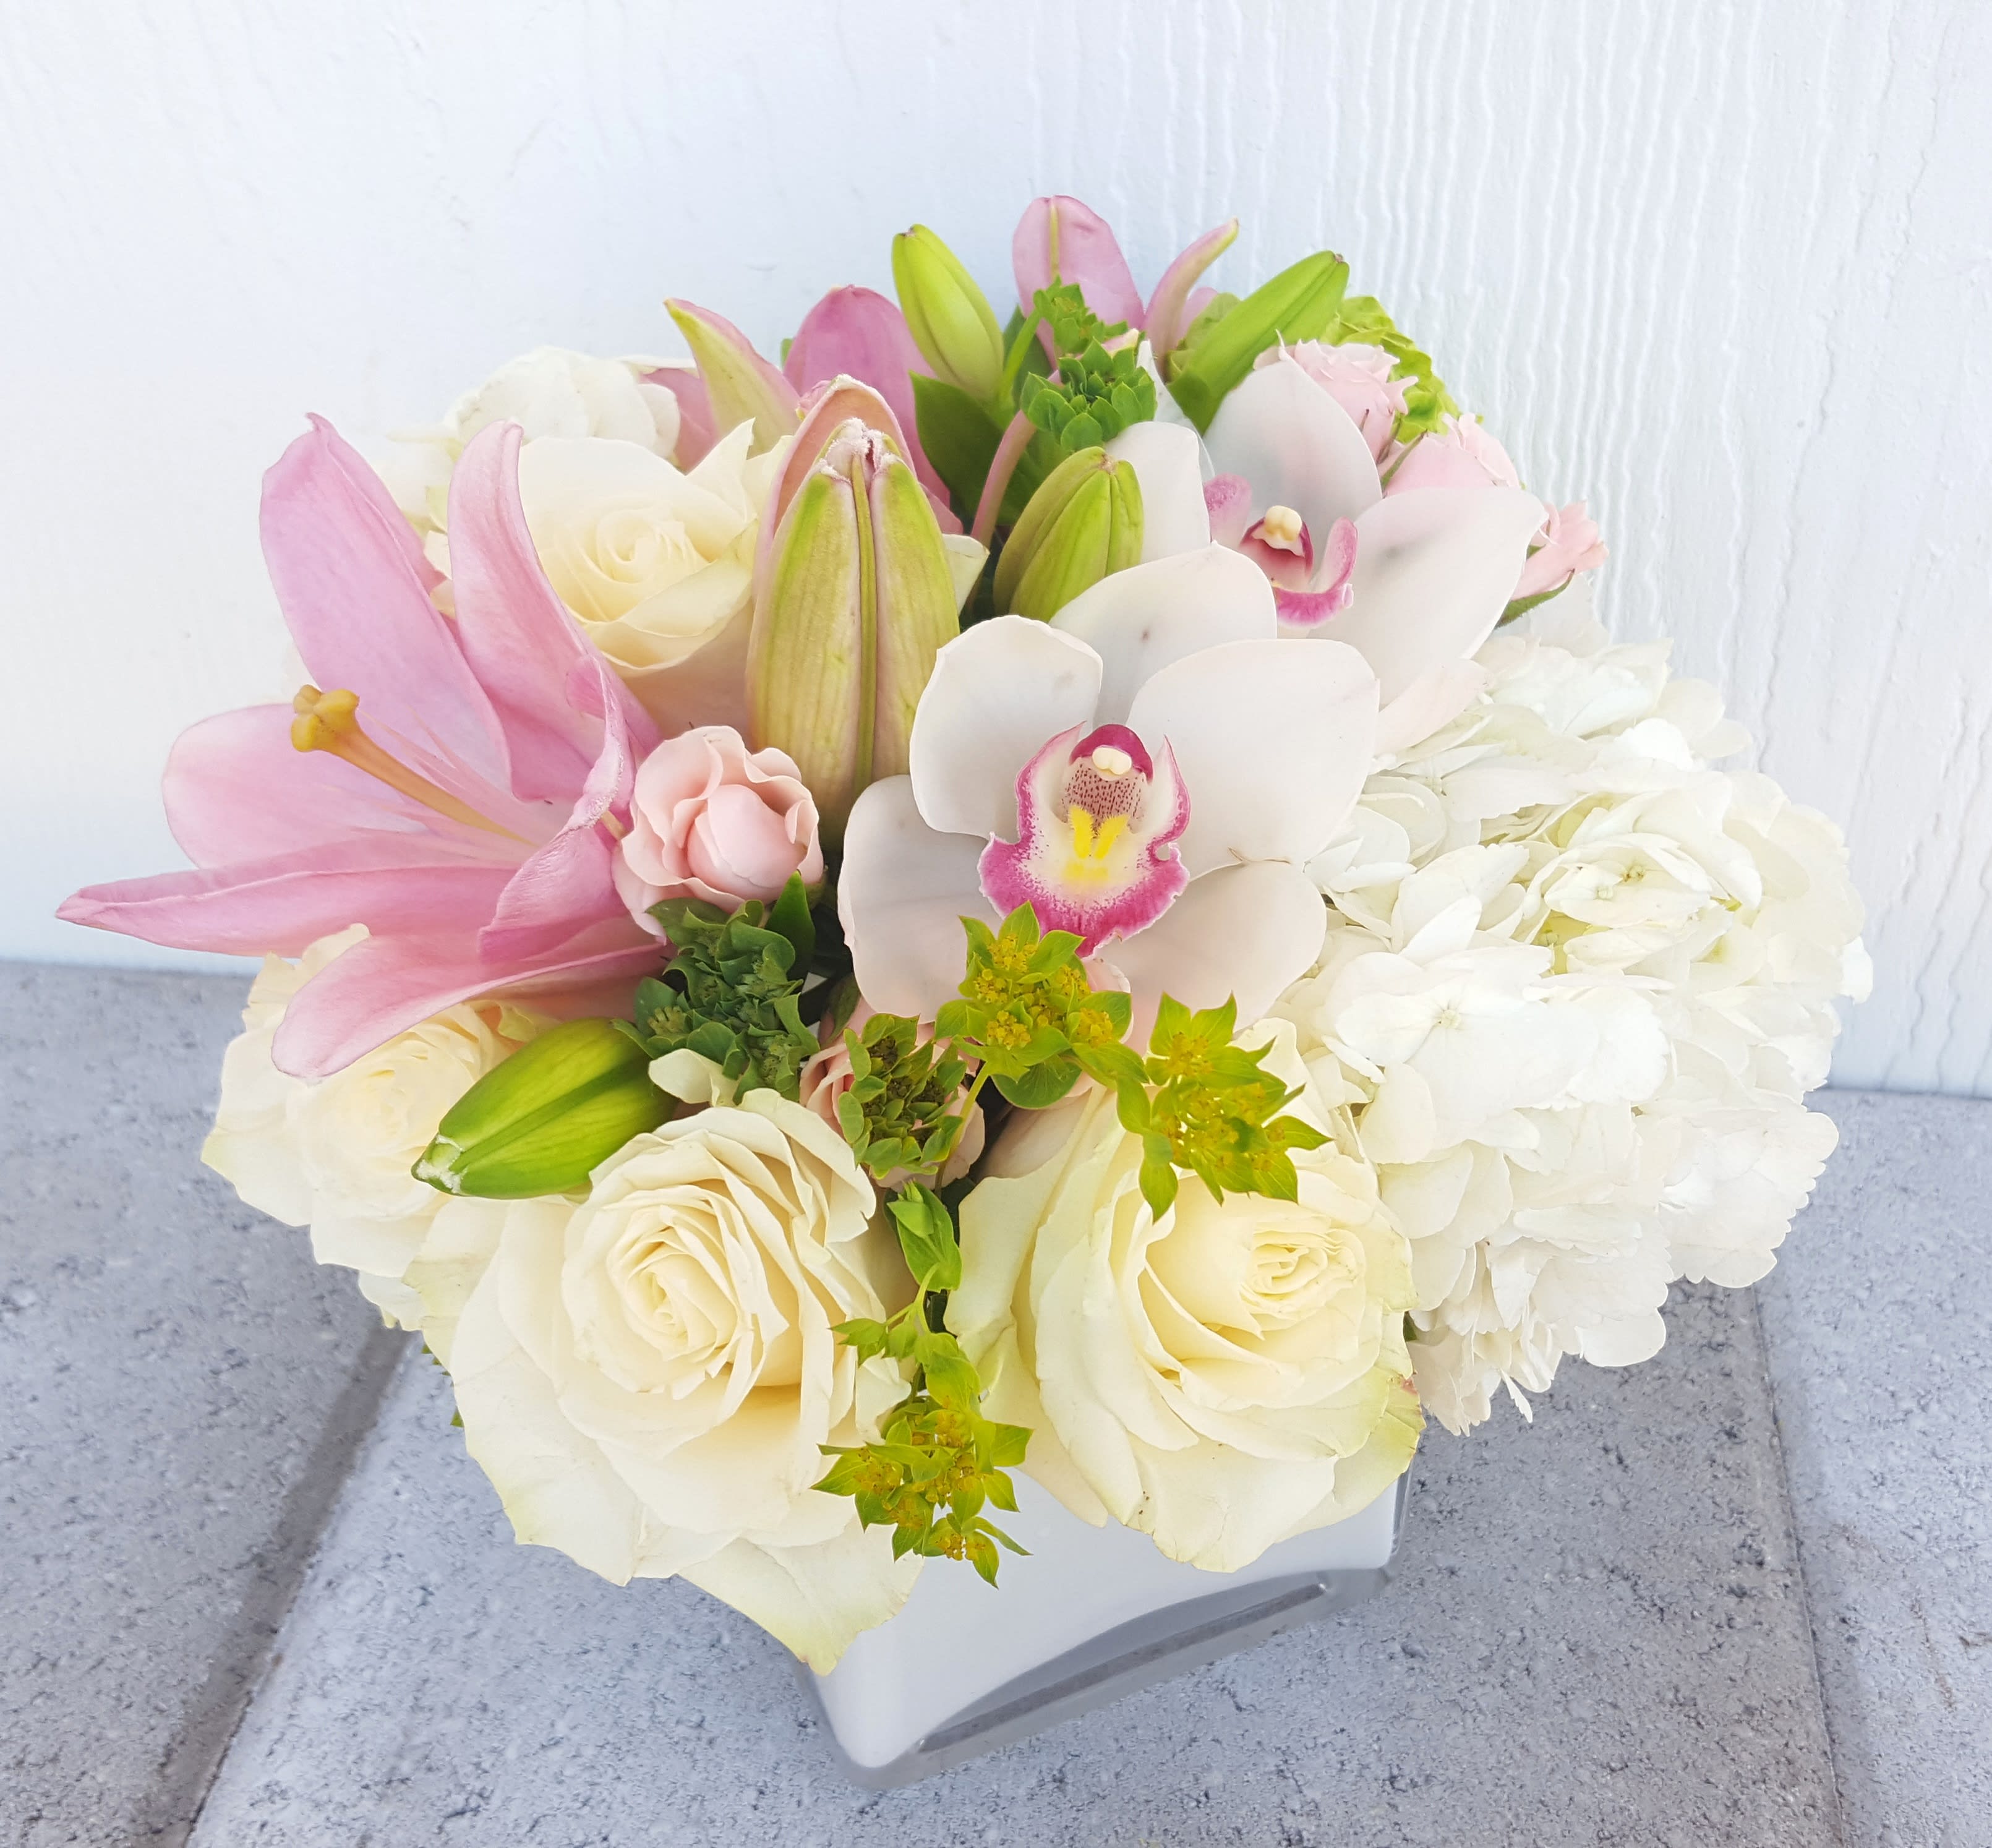 Blushing Beauty - Beautiful blush and white in this arrangement with  roses, hydrangea, orchids and more. Measures approximately 10&quot; wide x 10&quot; high. Comes in a Clear cube 